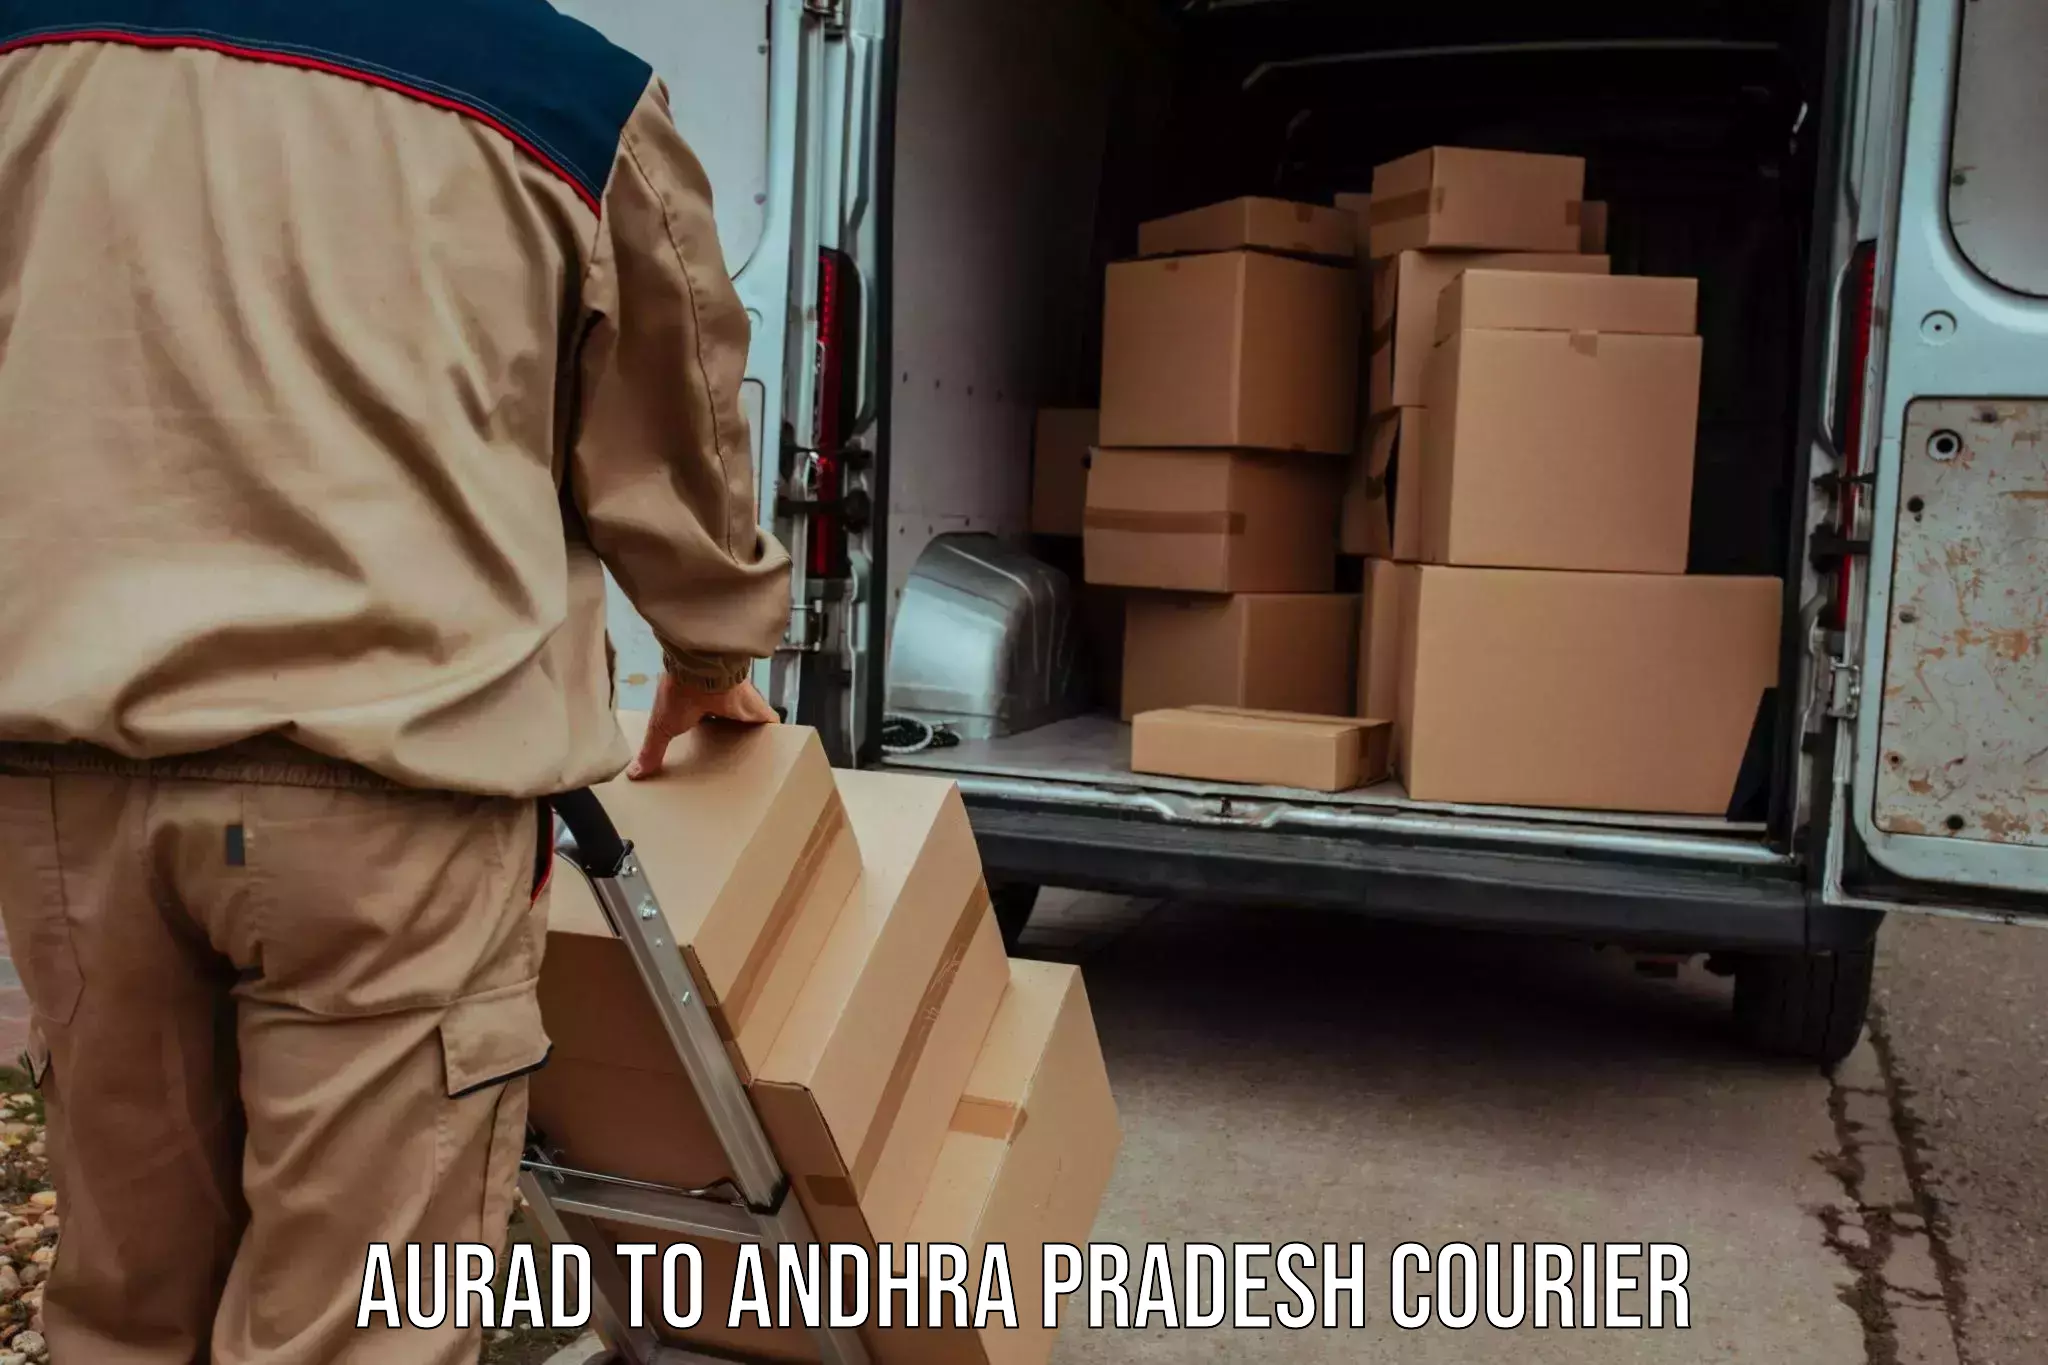 Global shipping networks Aurad to IIIT Chittoor